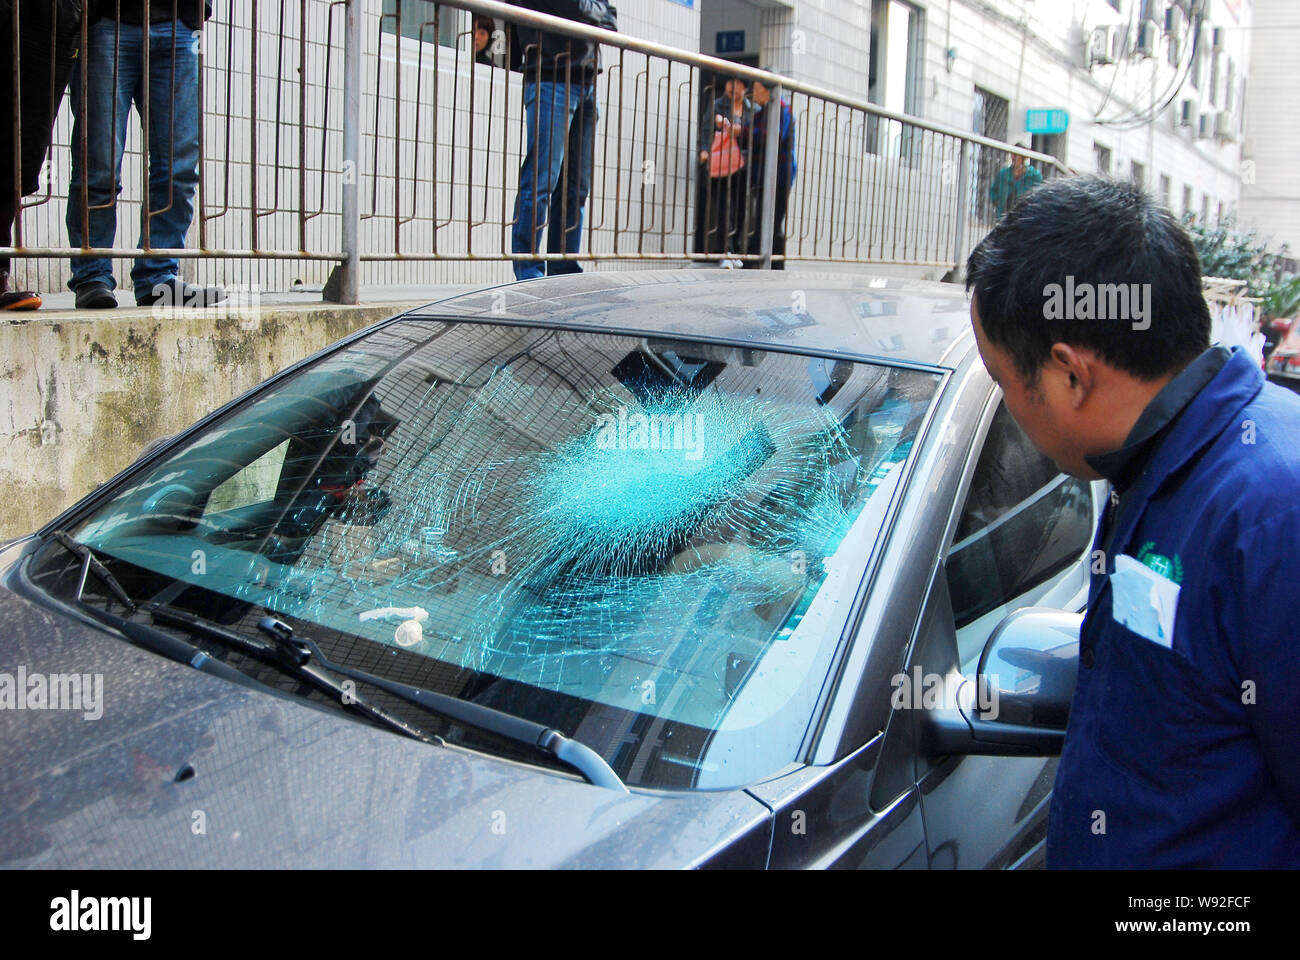 Local residents look at a used condom on the shattered front windshield of a Chevrolet Cruze after it fell from an unknown floor of a high-rise reside Stock Photo